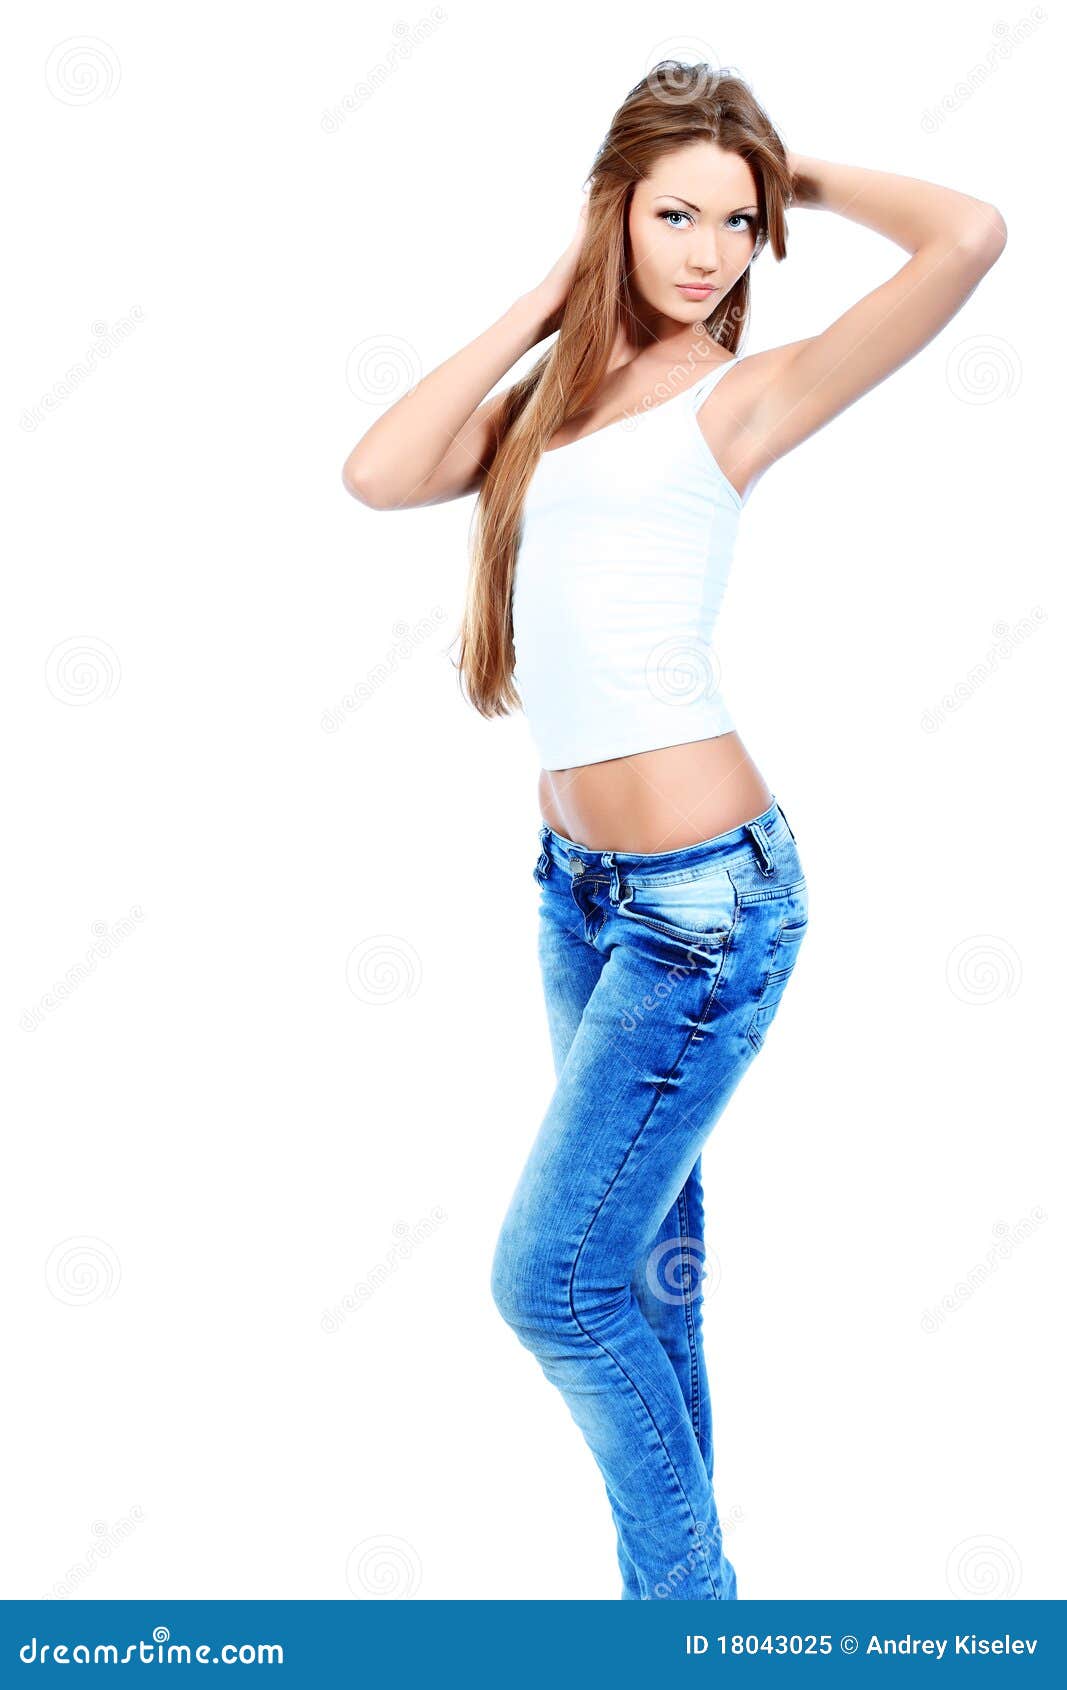 Slim woman stock image. Image of attractive, diet, body - 18043025